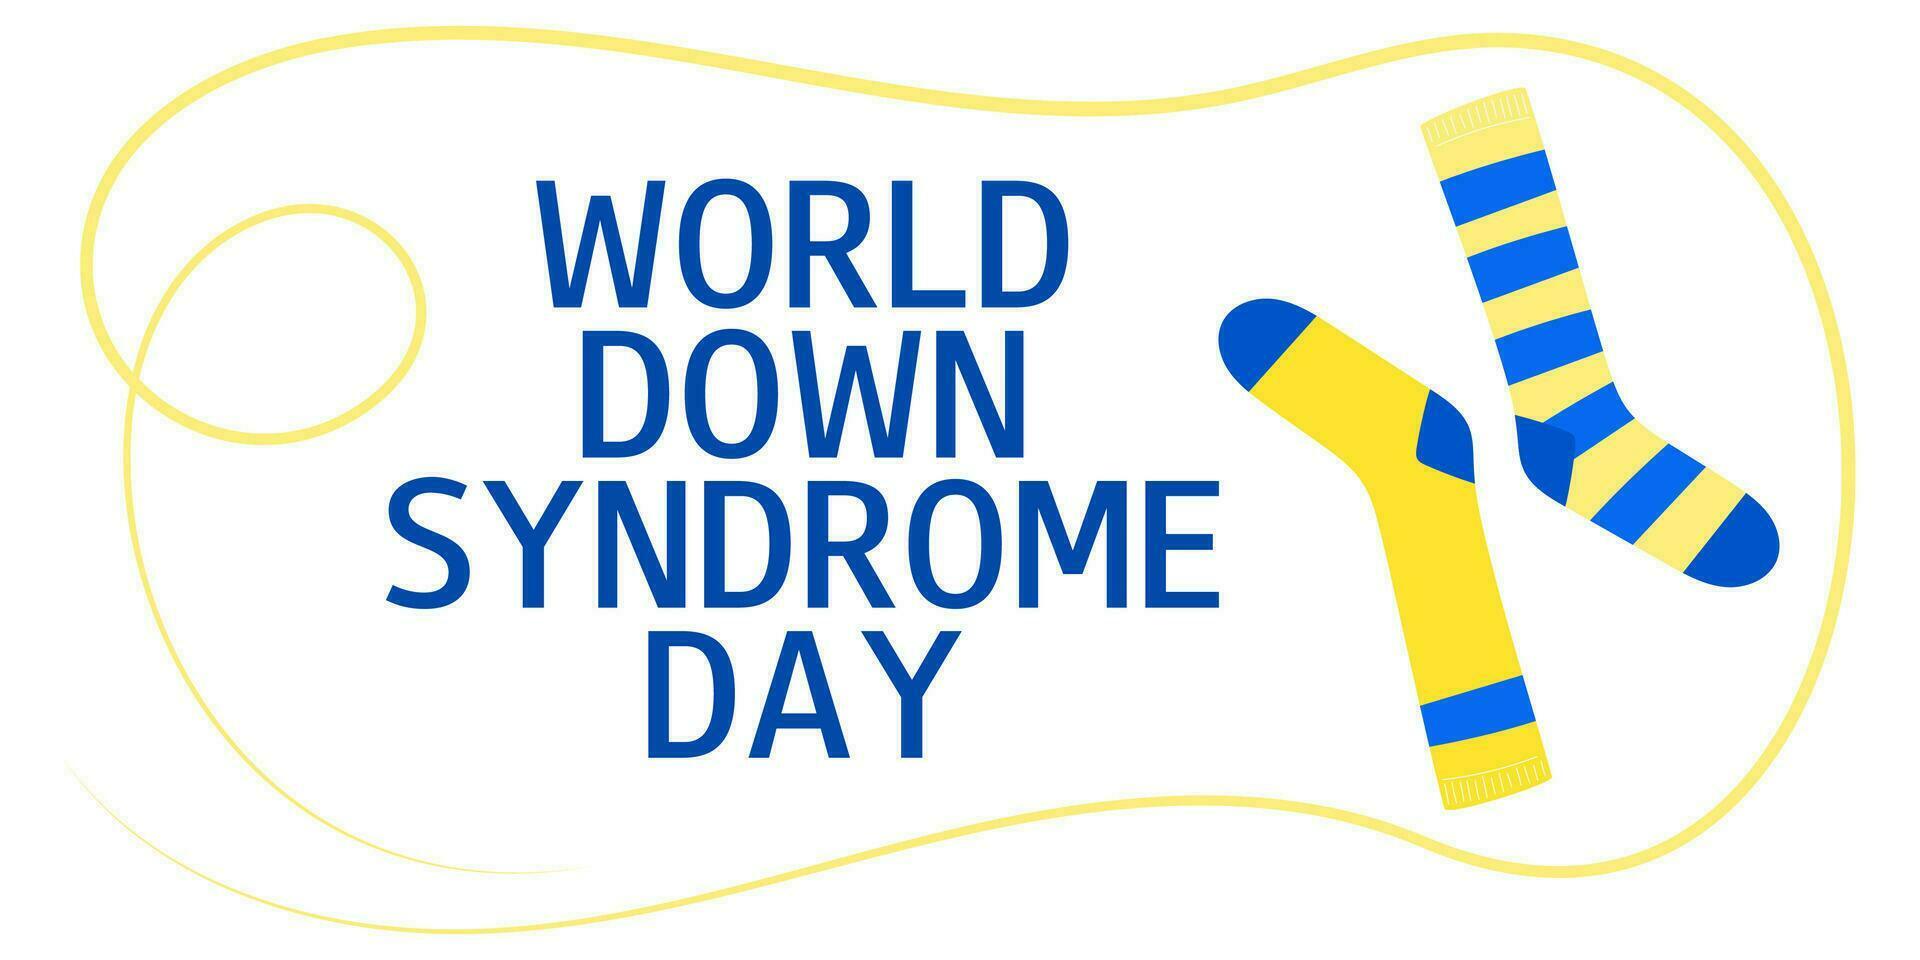 World Down Syndrome day. March 21. Different socks as a symbol for WDSD. Vector horizontal banner.